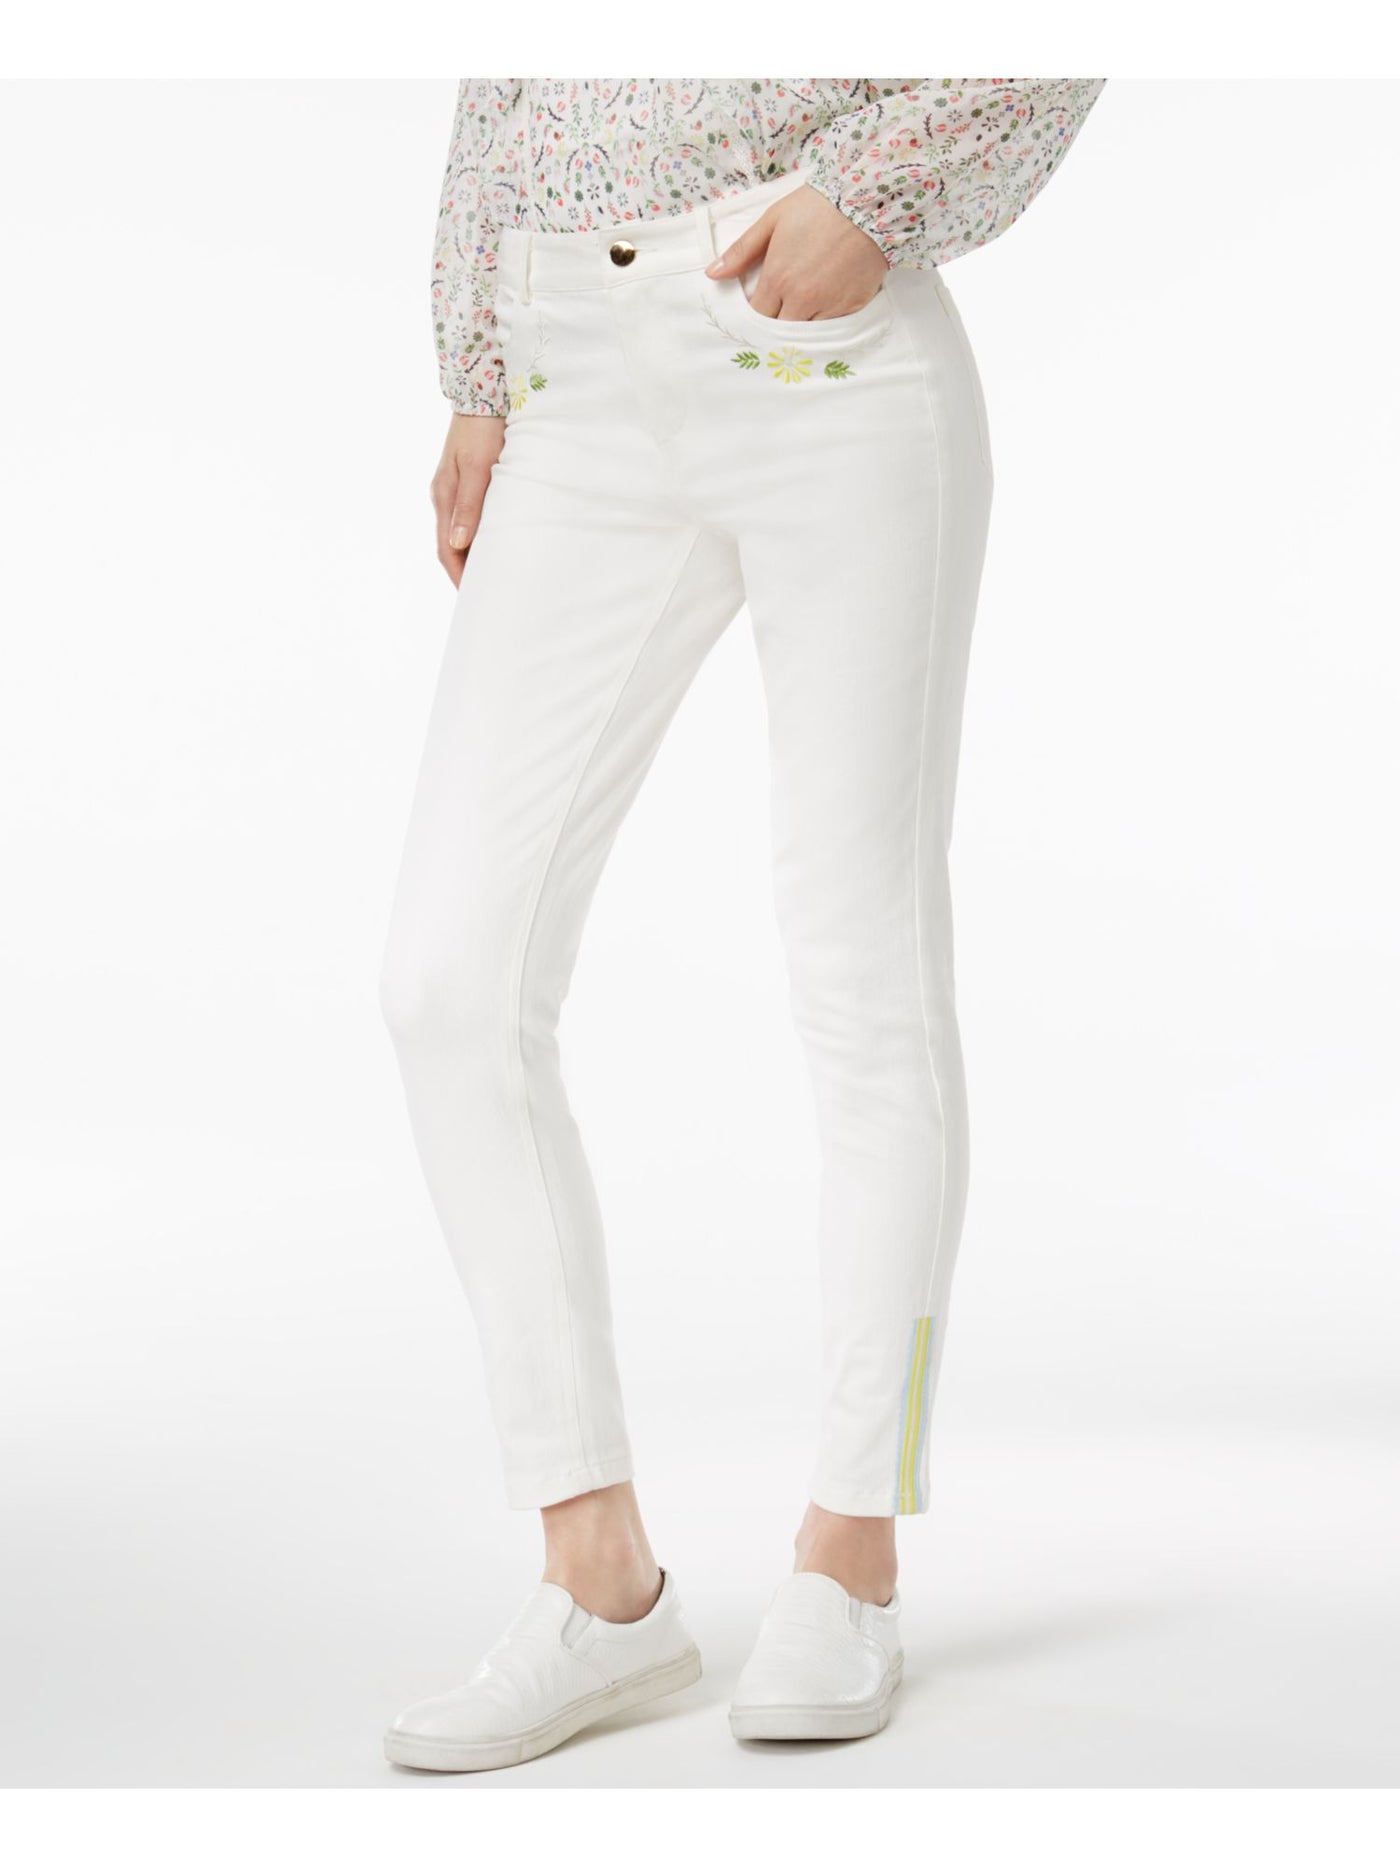 CYNTHIA ROWLEY Womens Embroidered Skinny Pants